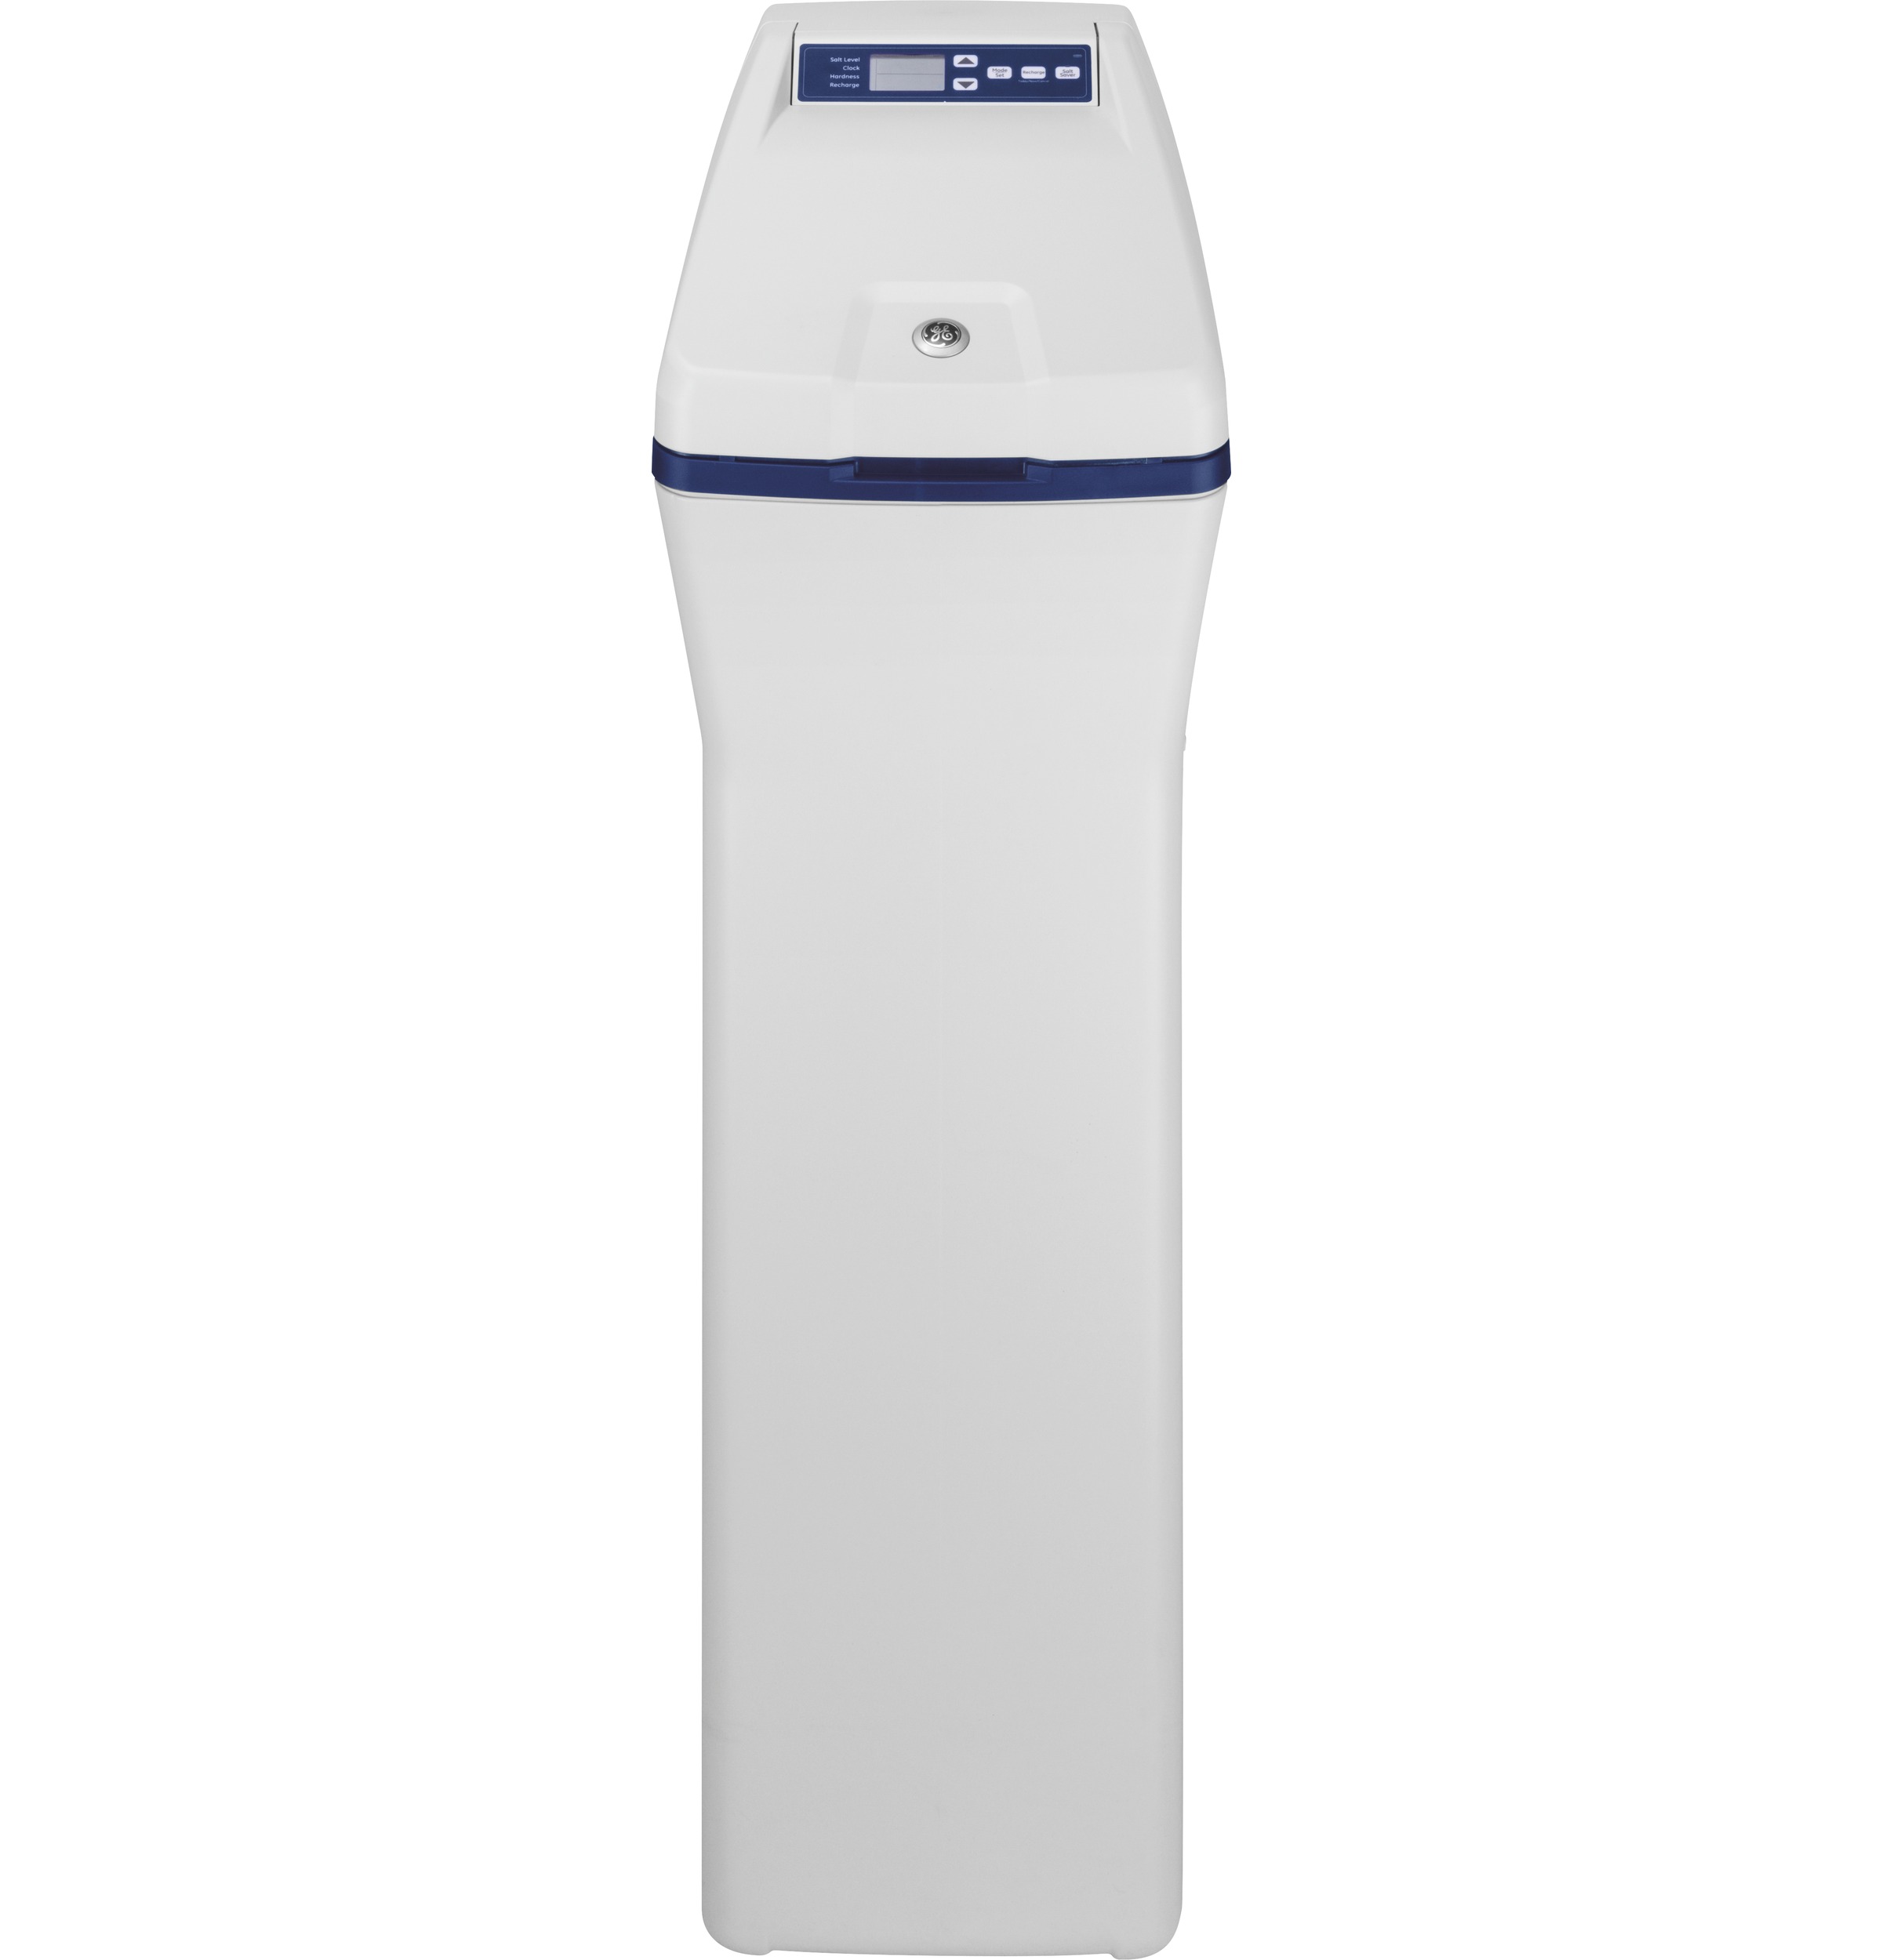 GE® 30,000 Grain Water Softener and Filter In One